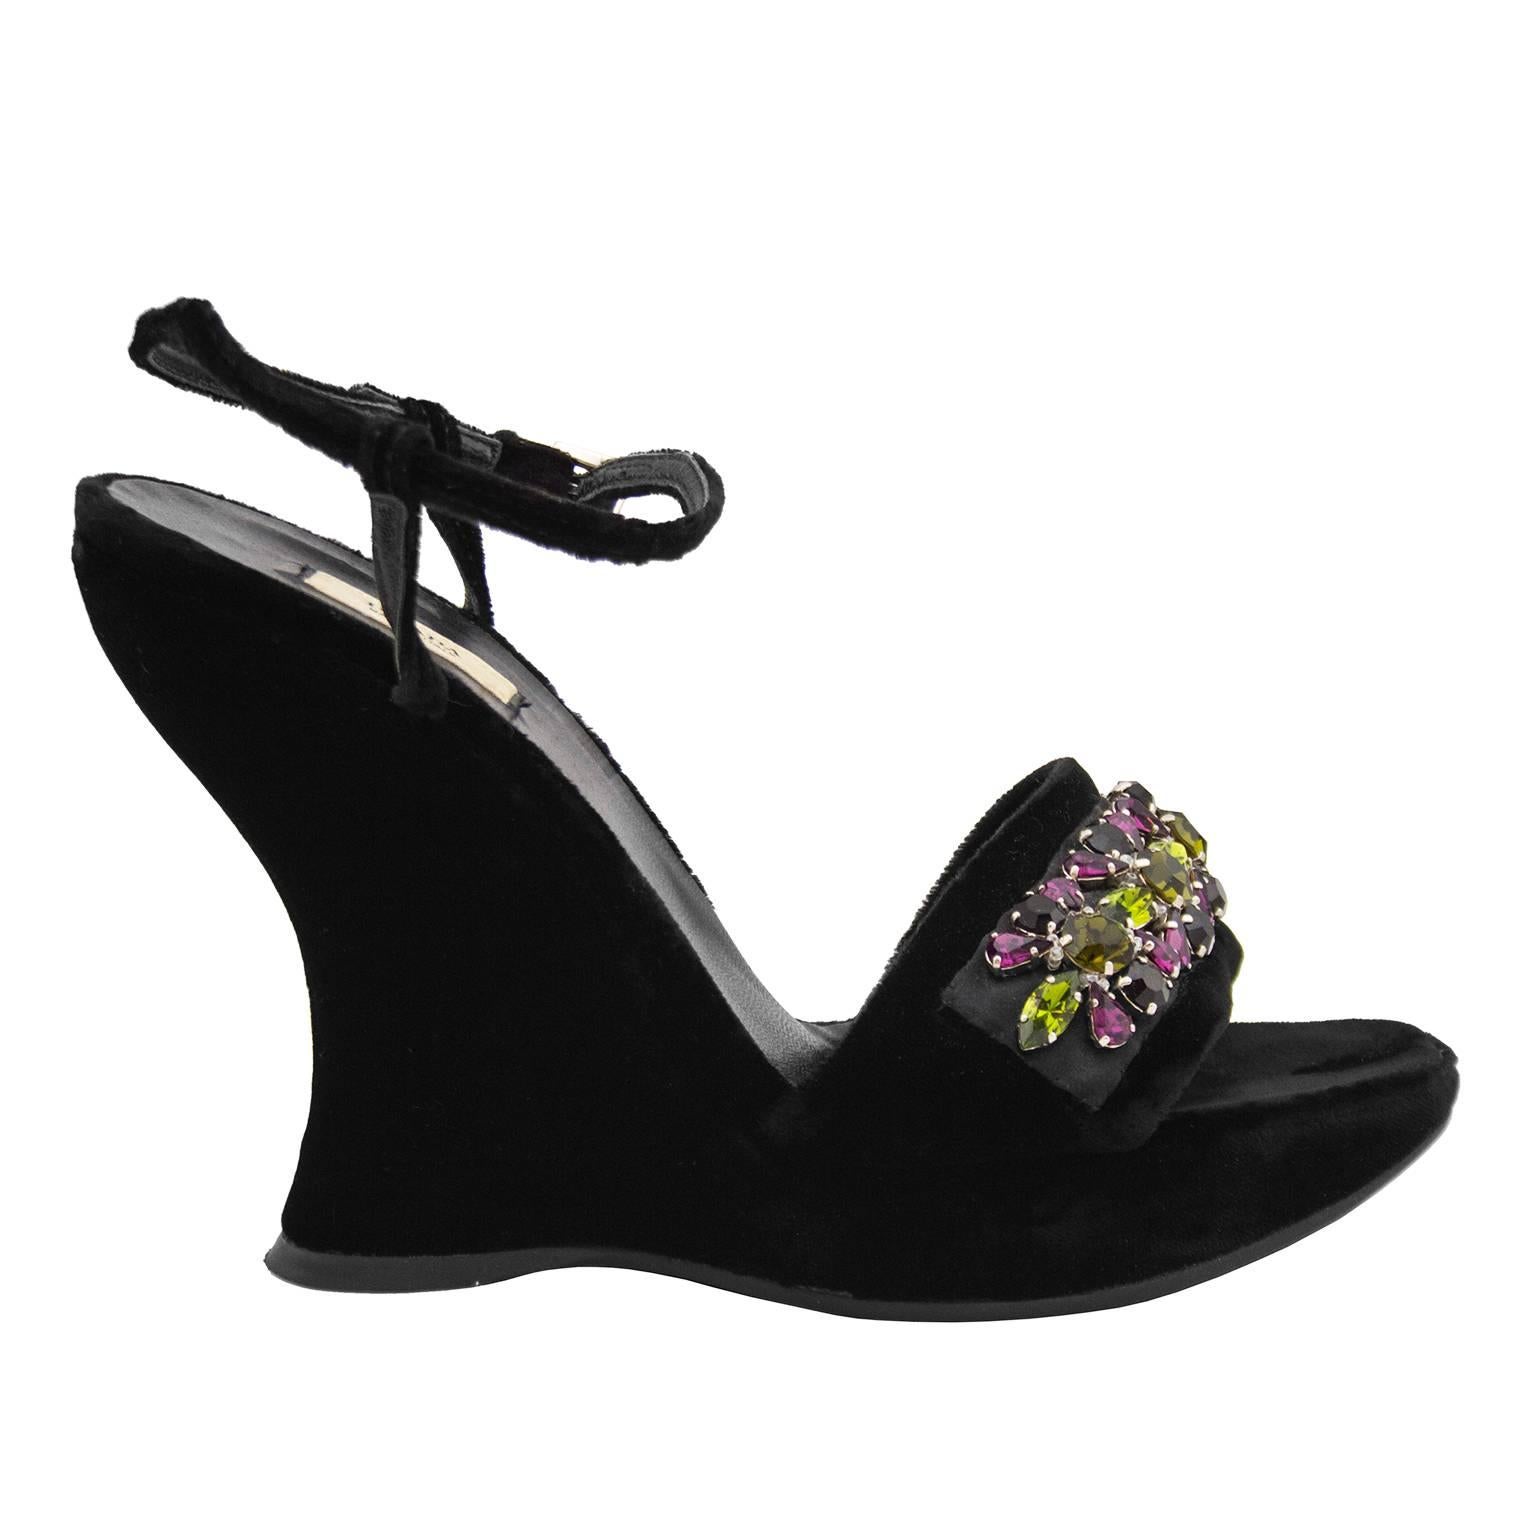 Immaculate 2004 Prada black velvet wedges with chartreuse, purple and black Swarovski crystals 'flowers' along the toe strap. The black velvet ankle straps have delicate silver buckles and the insole is lined in black leather. In excellent, never